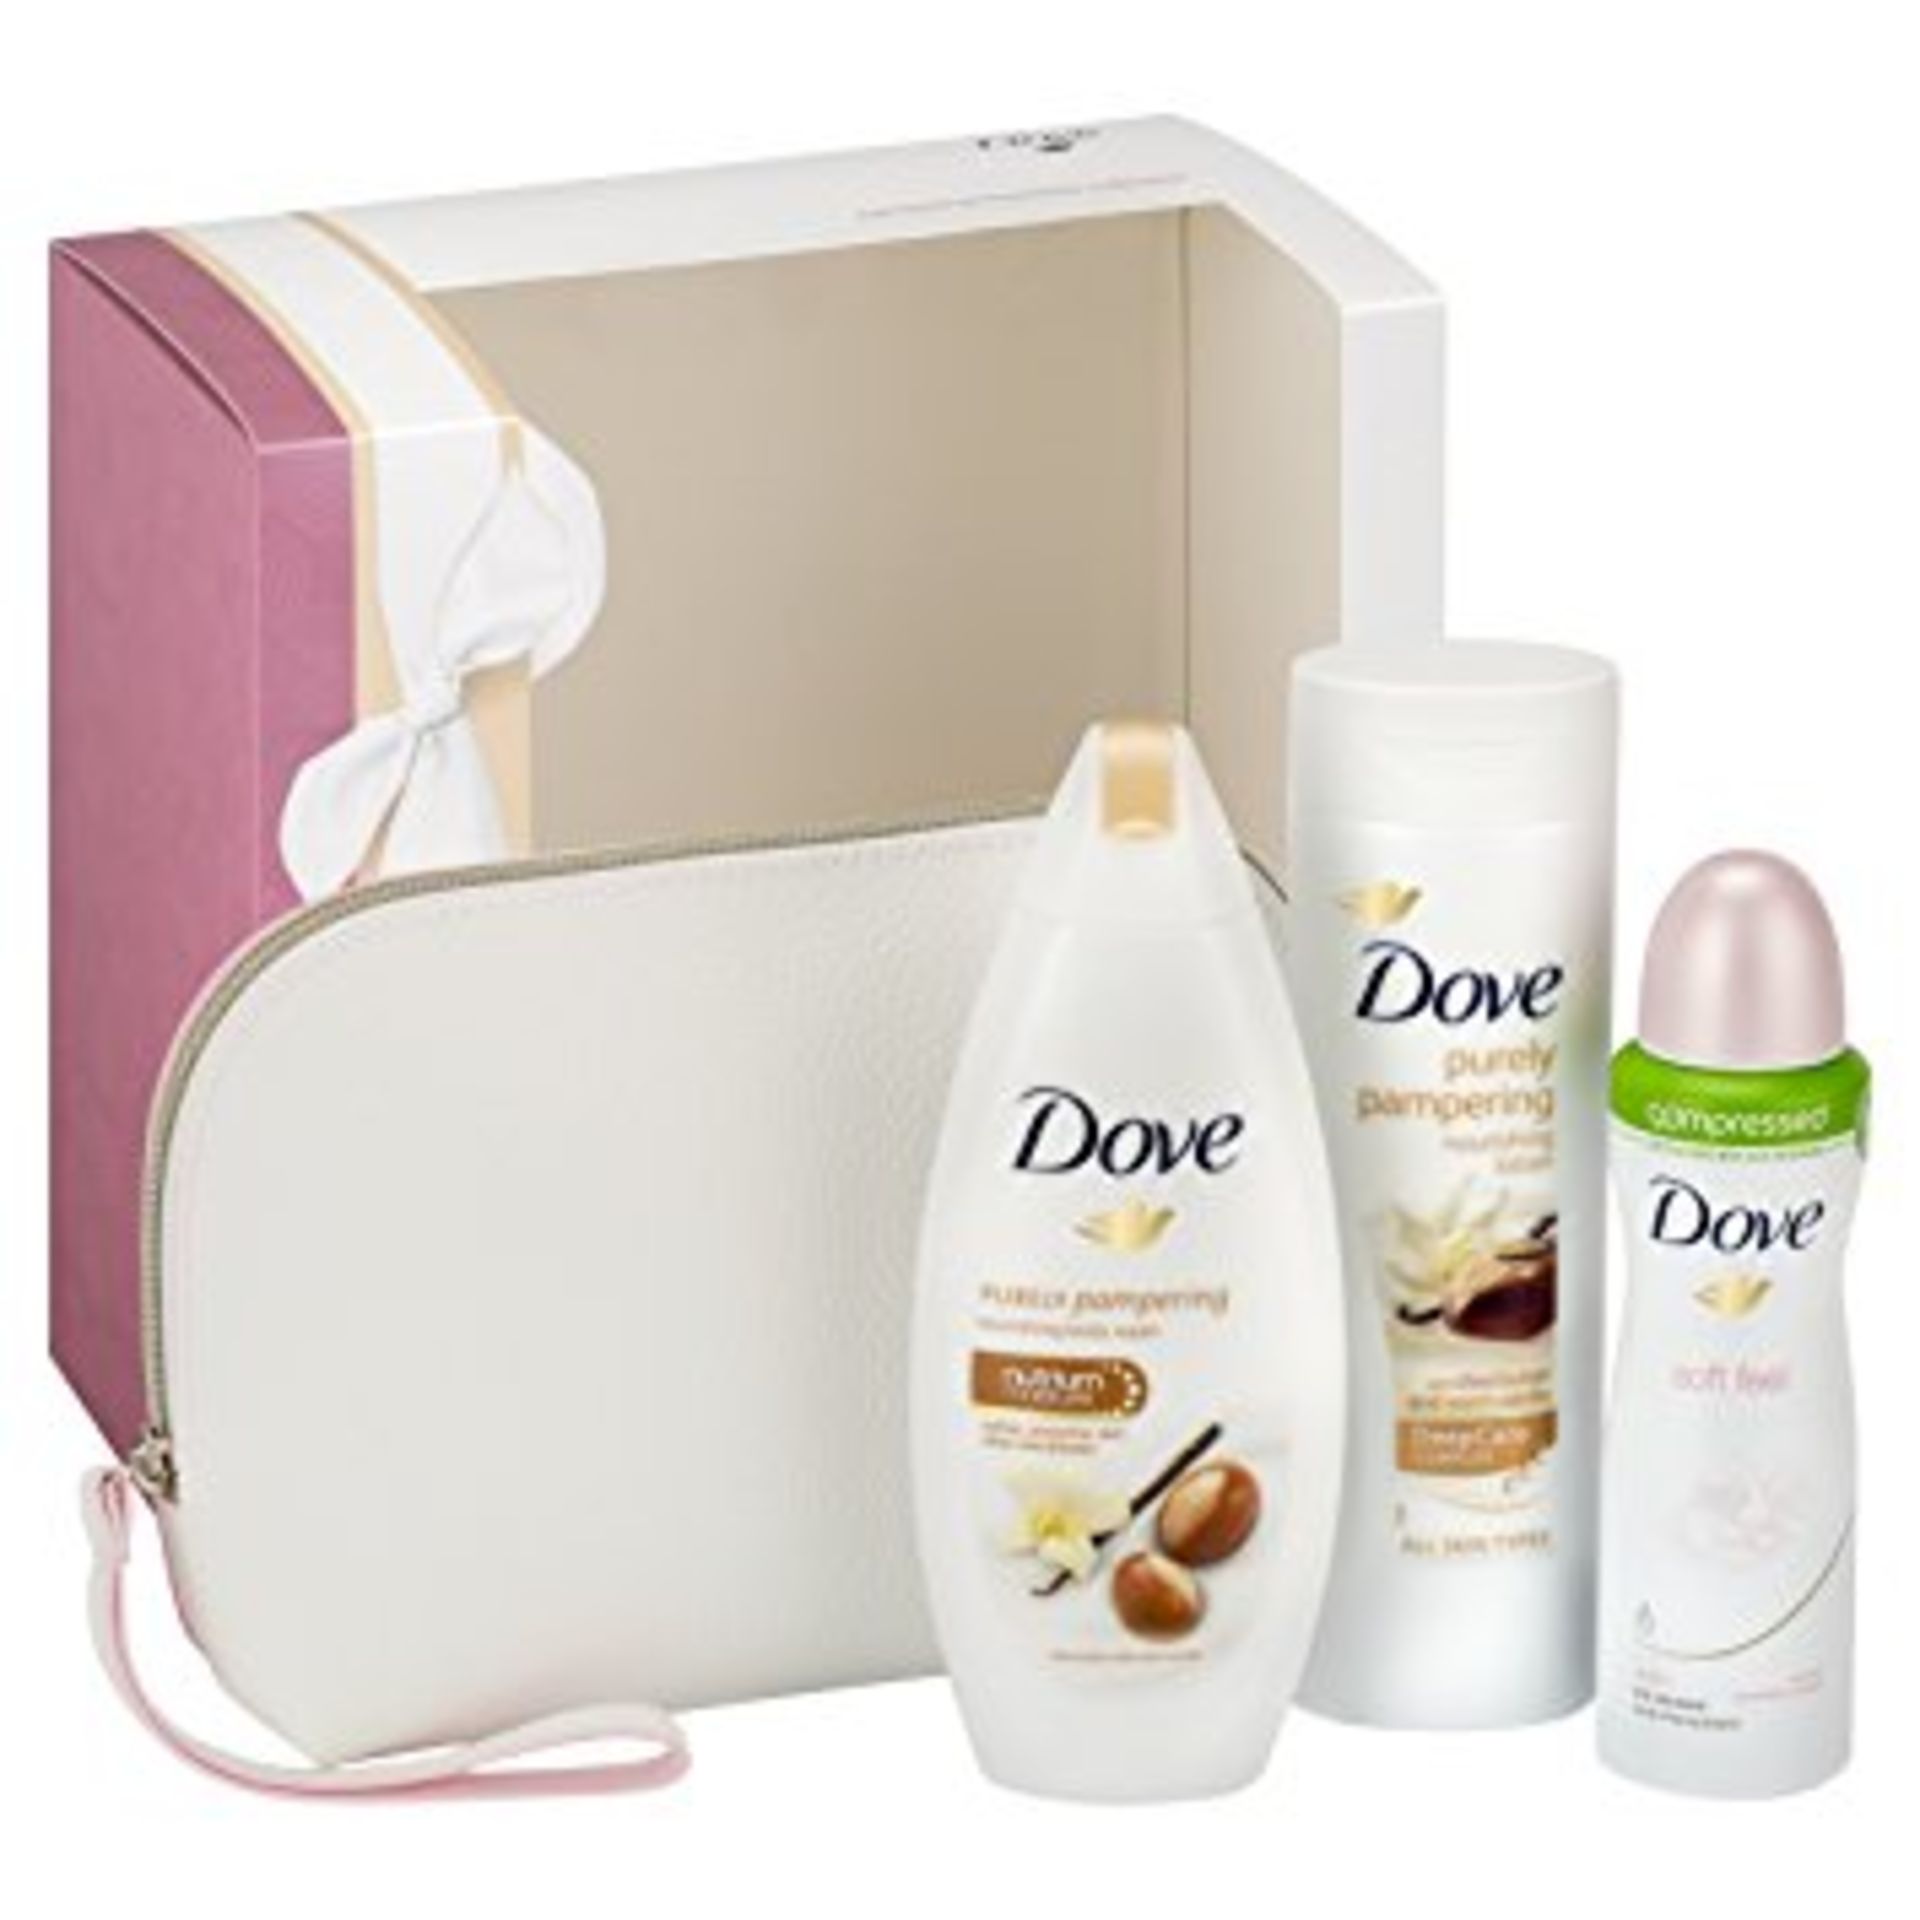 + VAT Brand New Dove Pampering Moments Trio & Washbag Set Includes 3 Full-Size Dove Products